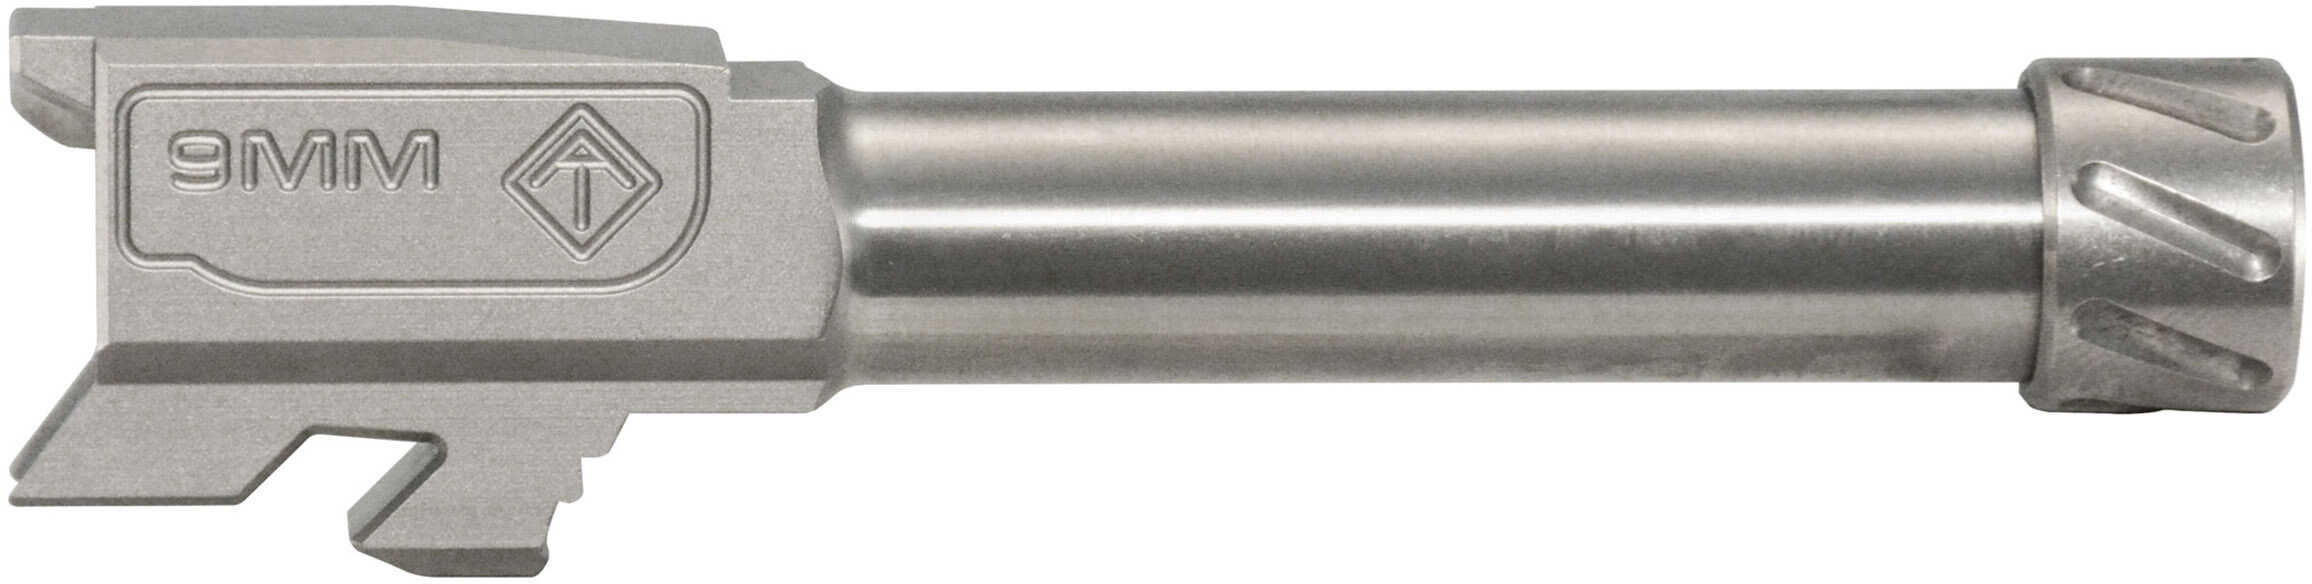 American Tactical Imports Match Grade Drop-In Threaded Barrel for Glock 43 9mm Md: ATIBG43T